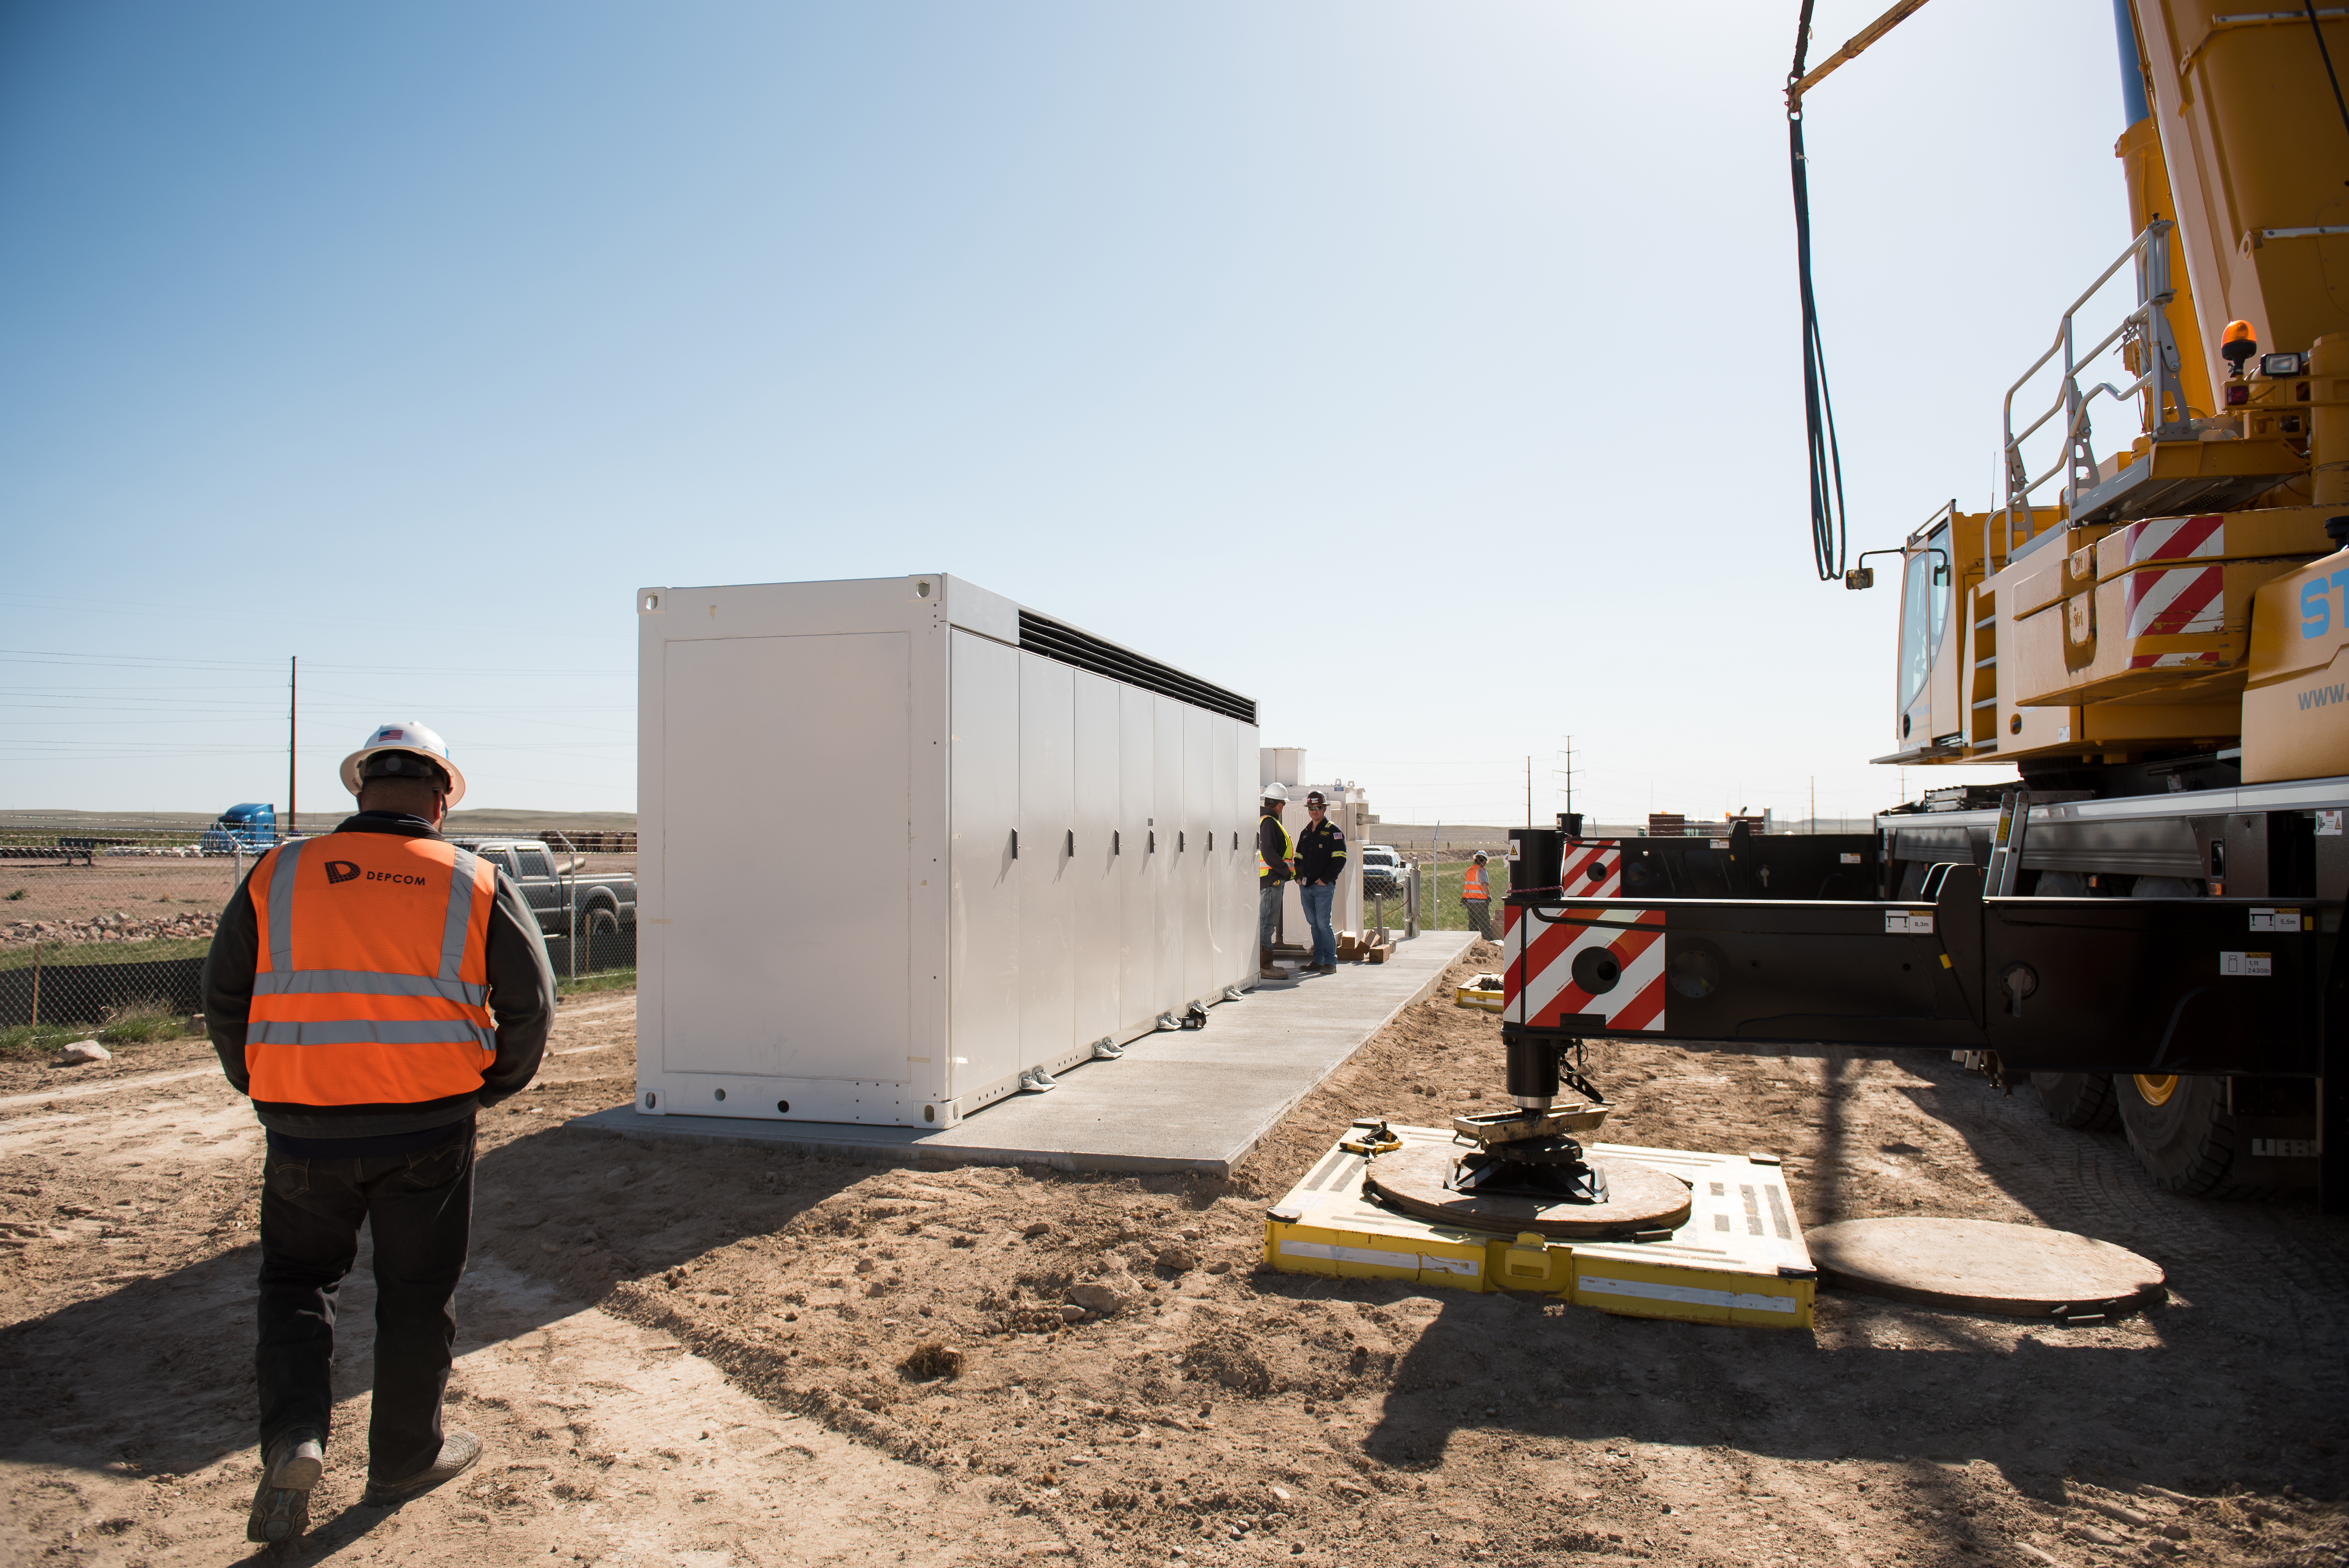 Optimize Energy Storage for Reliability and ROI